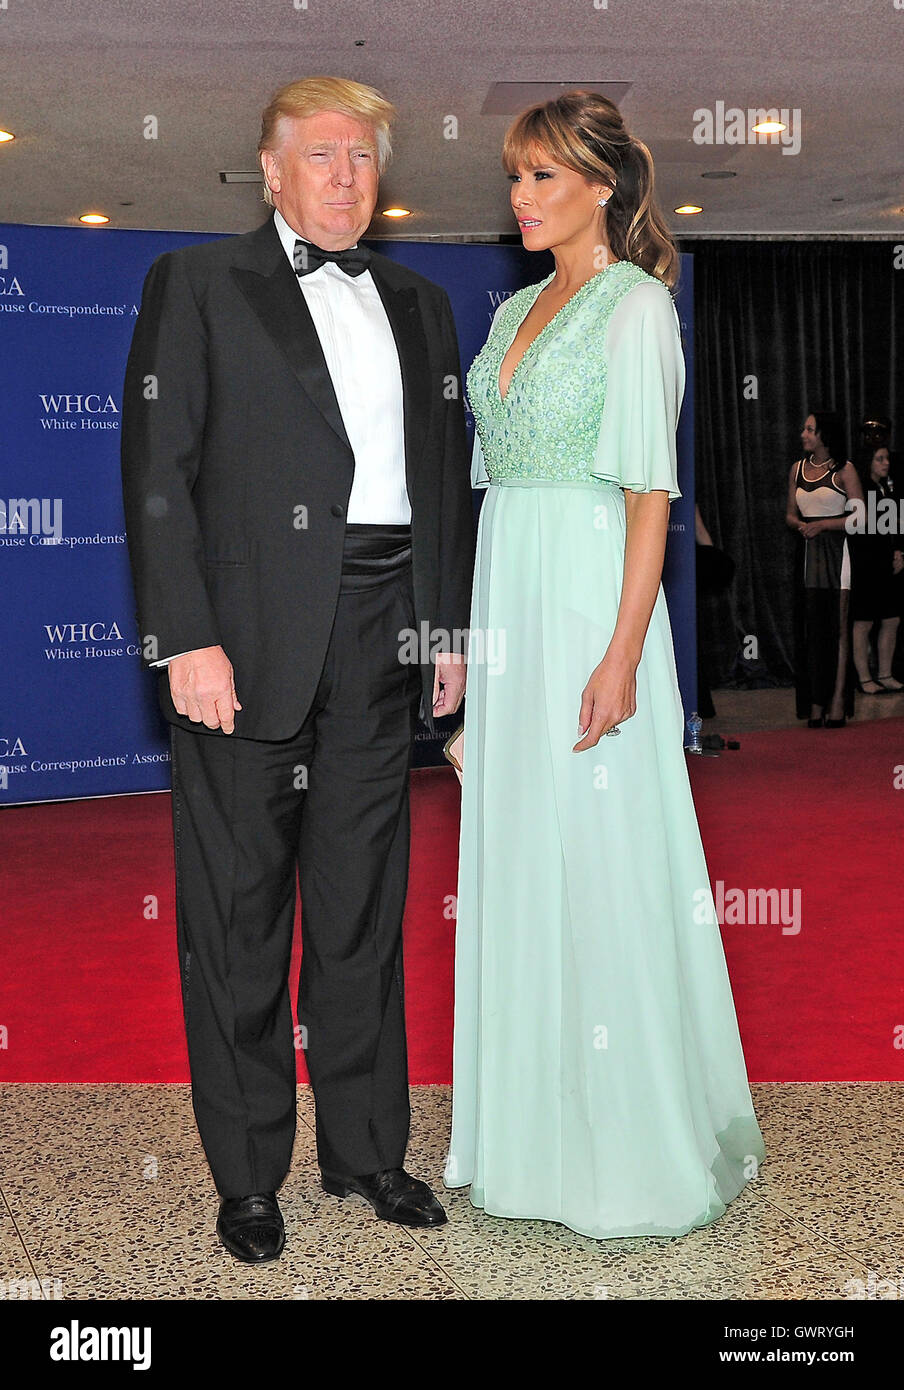 Donald and Melania Trump arrives for the 2015 White House Correspondents Association Annual Dinner at the Washington Hilton Hotel on Saturday, April 25, 2015. Credit: Ron Sachs / CNP /MediaPunch Stock Photo